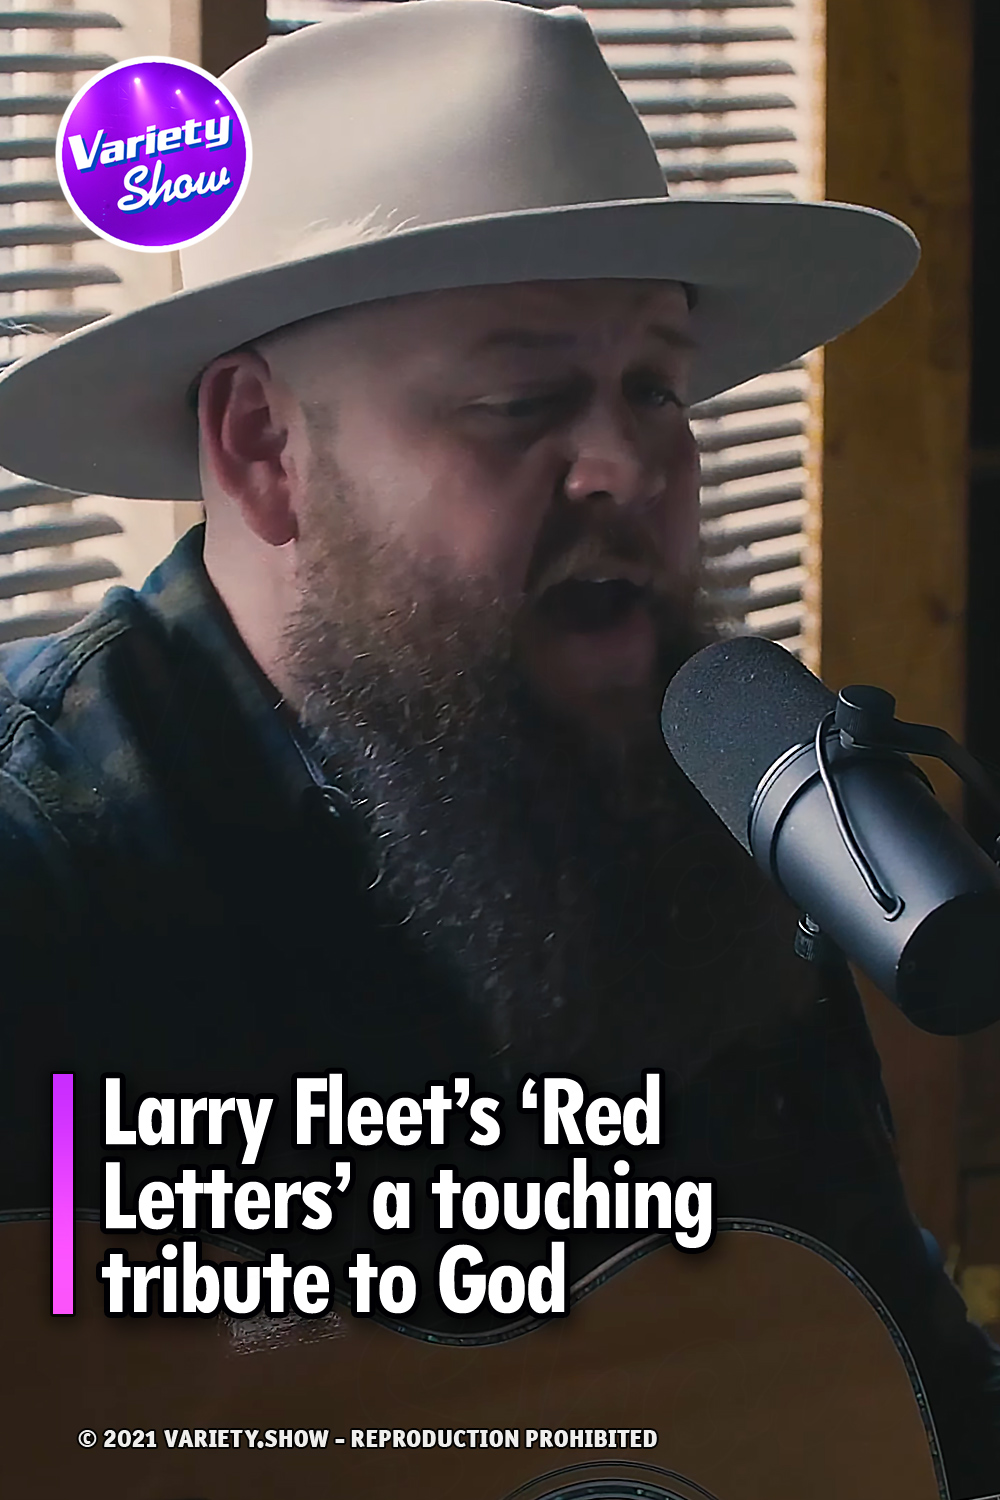 Larry Fleet’s ‘Red Letters’ a touching tribute to God